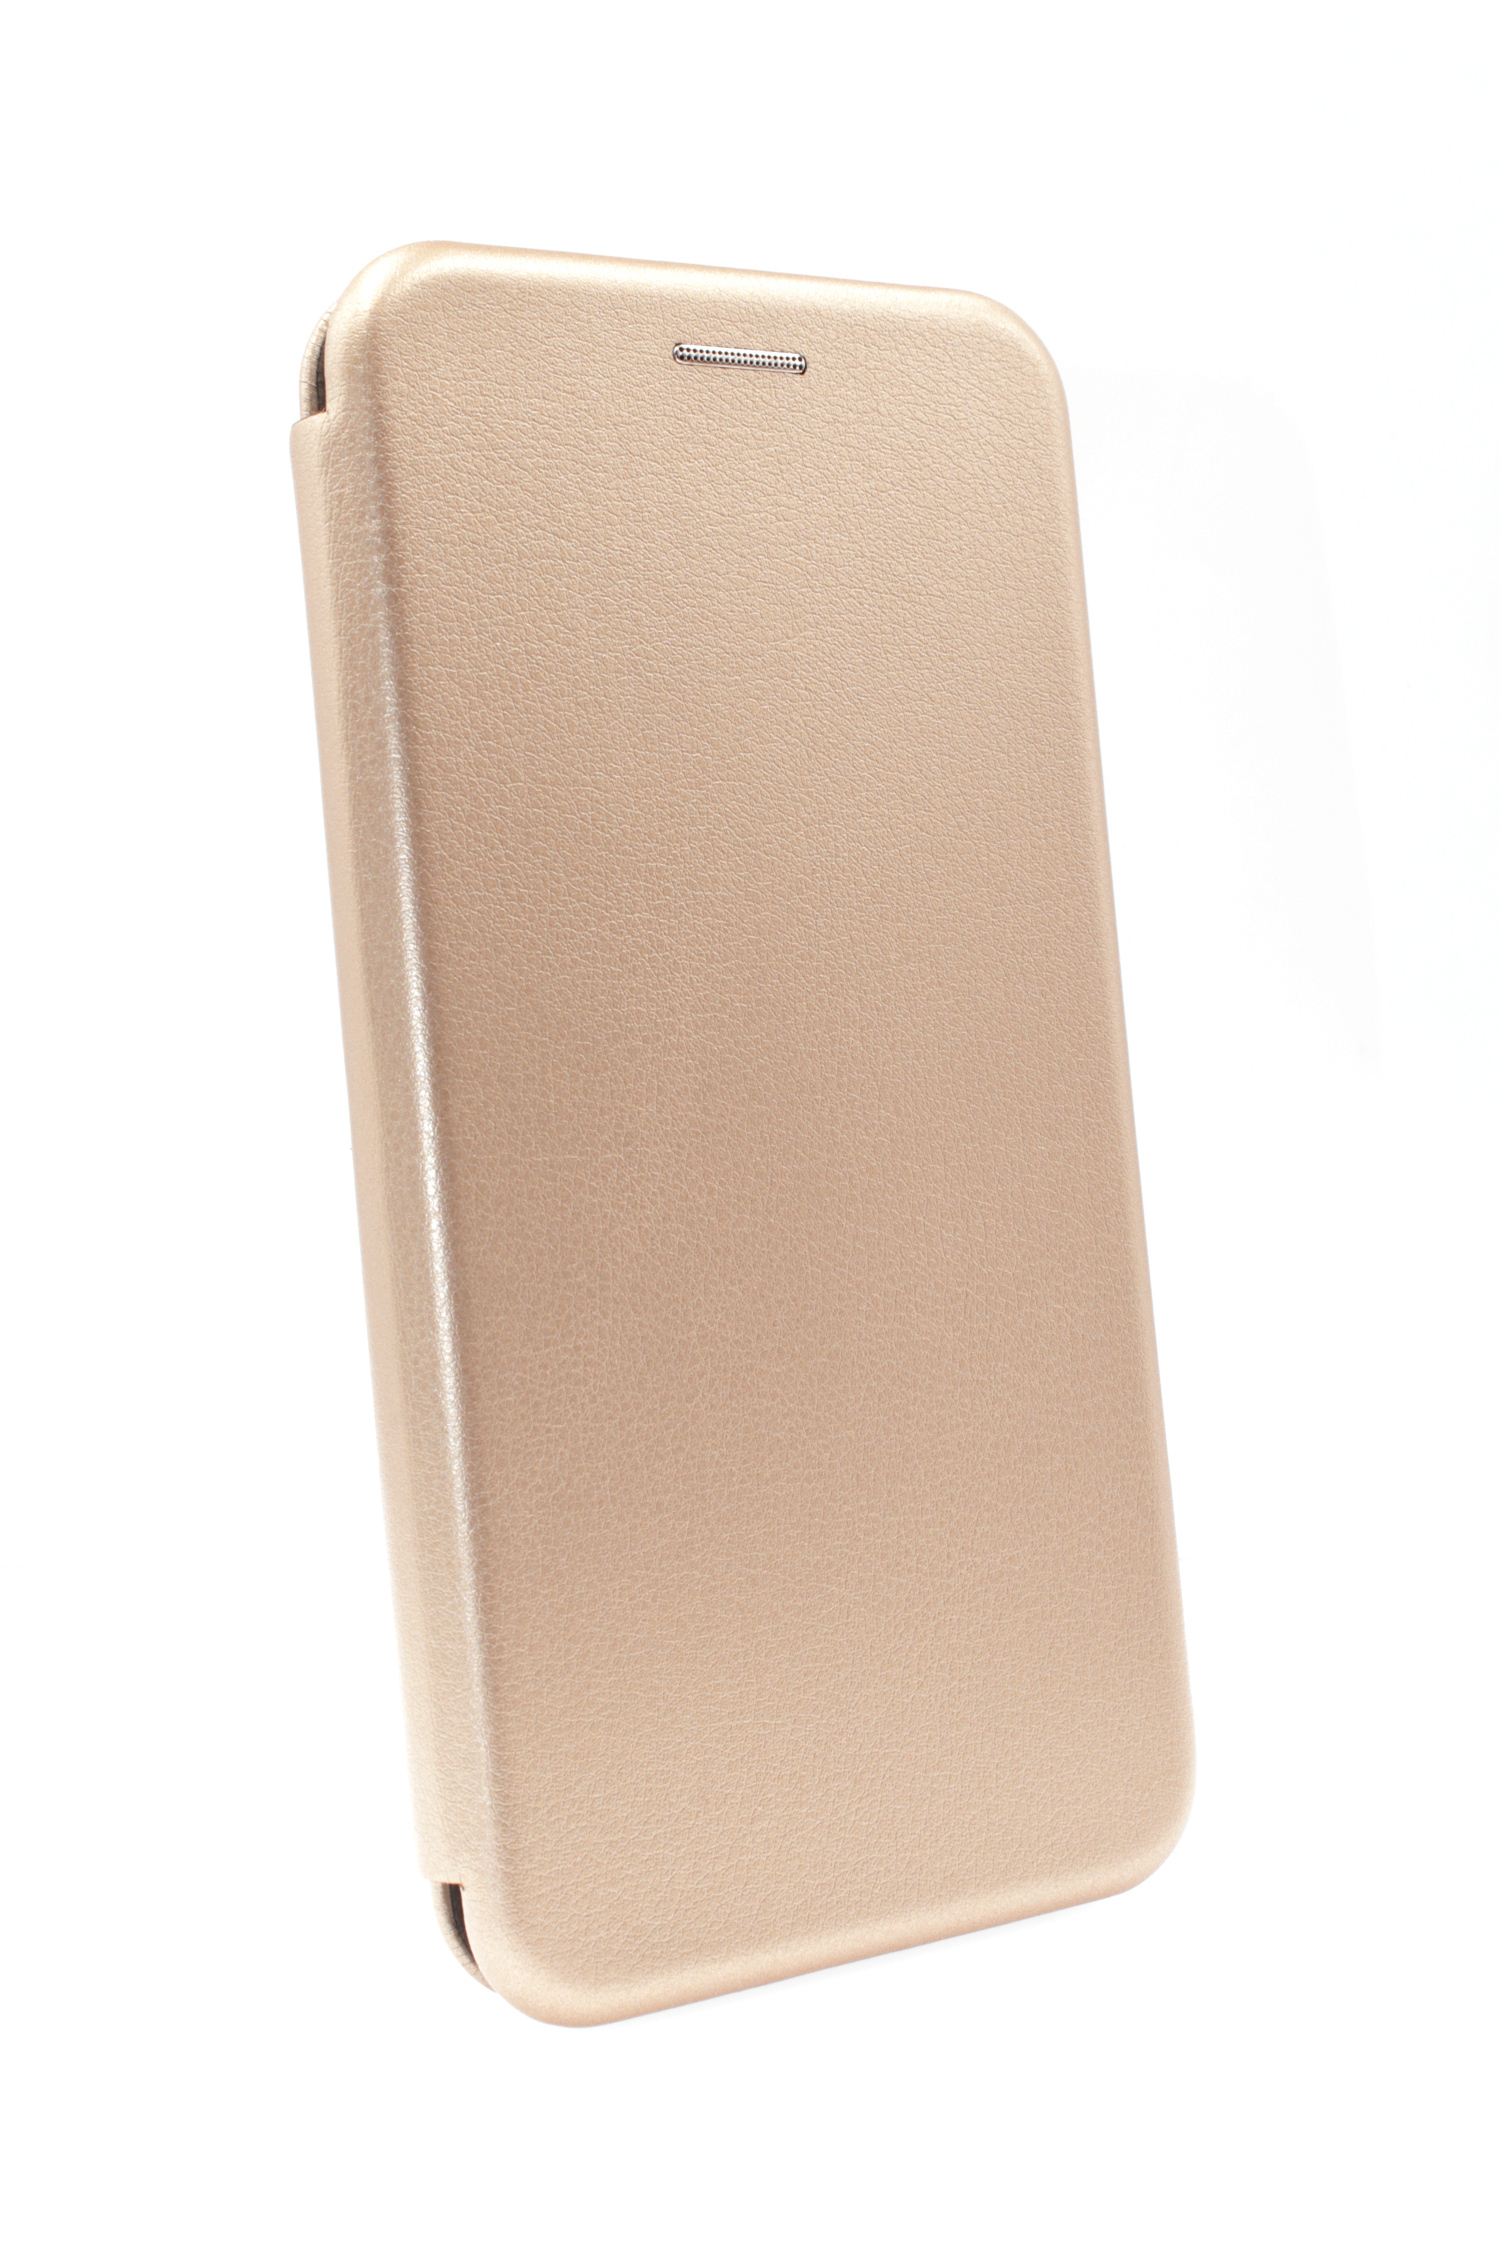 iPhone Gold Bookcase Rounded, JAMCOVER 11 Bookcover, Apple, Pro,